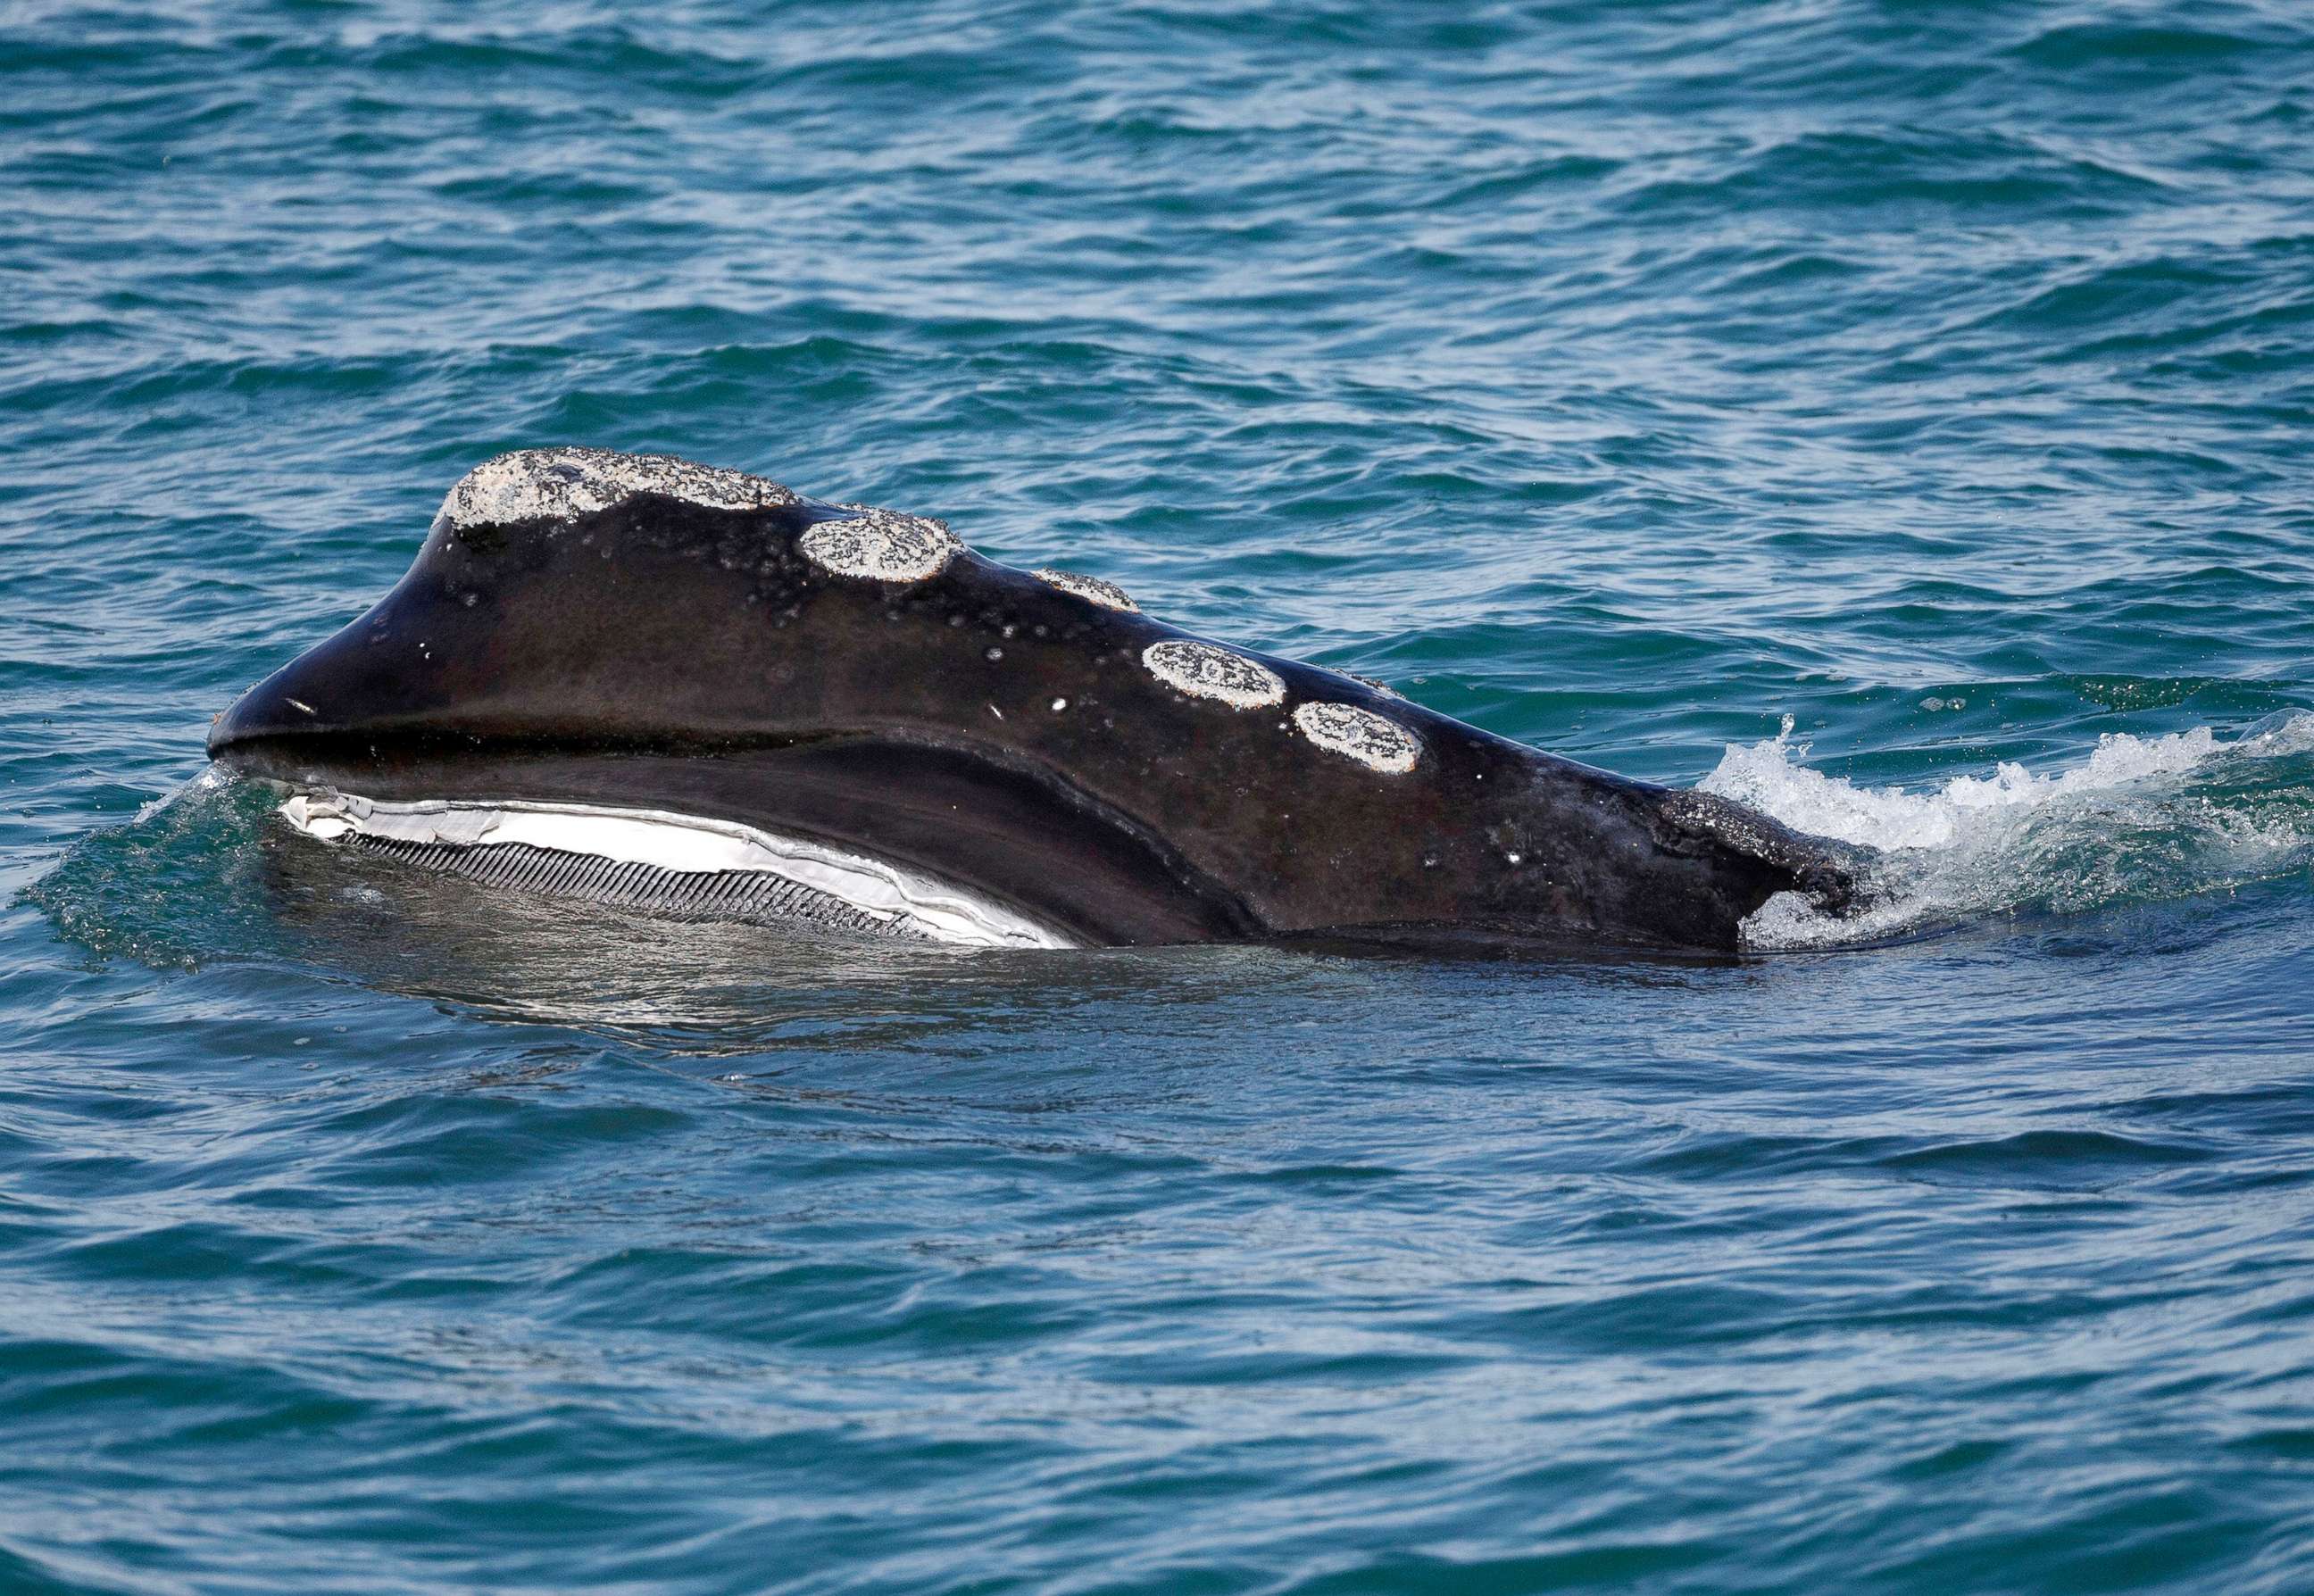 Rescuers attempt to free right whale tangled in fishing gear off coast of Canada pic